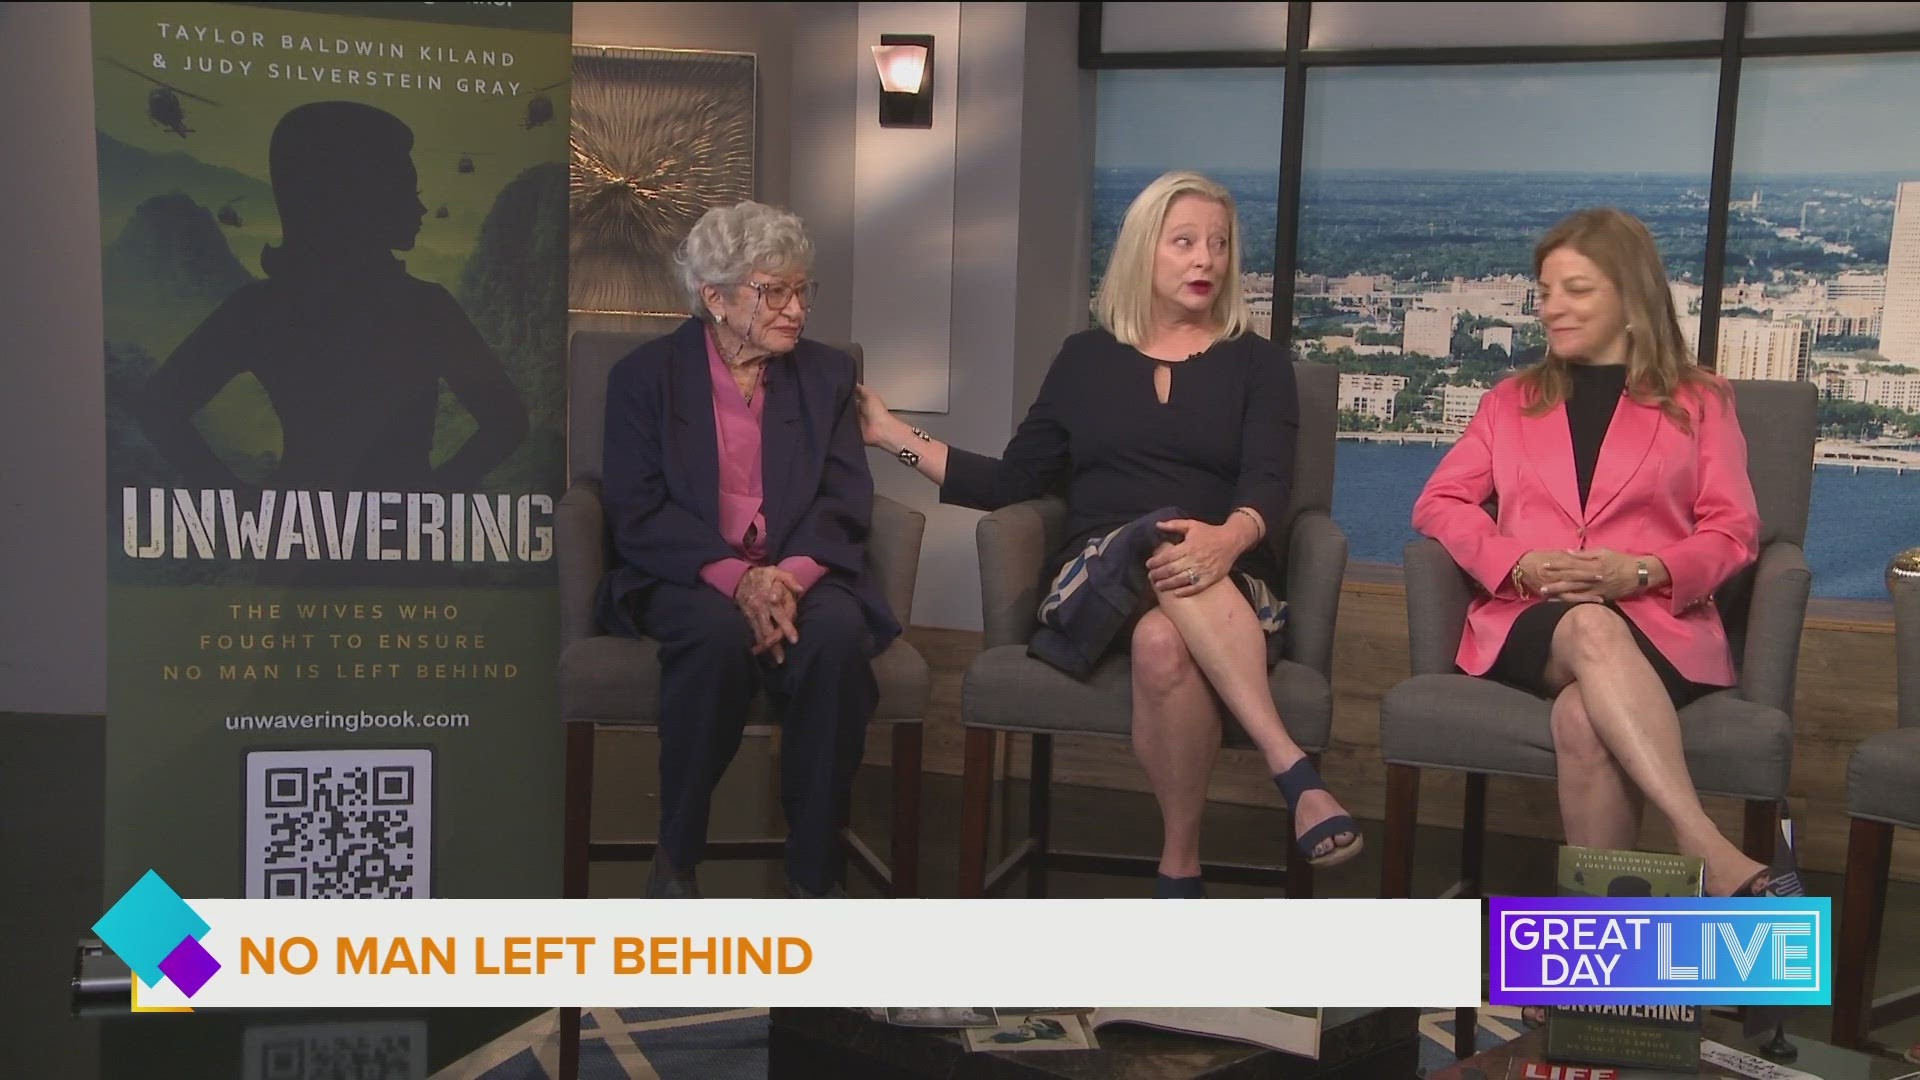 The authors of Unwavering: The Wives Who Fought to Ensure No Man Is Left Behind joined GDL to discuss their new book.